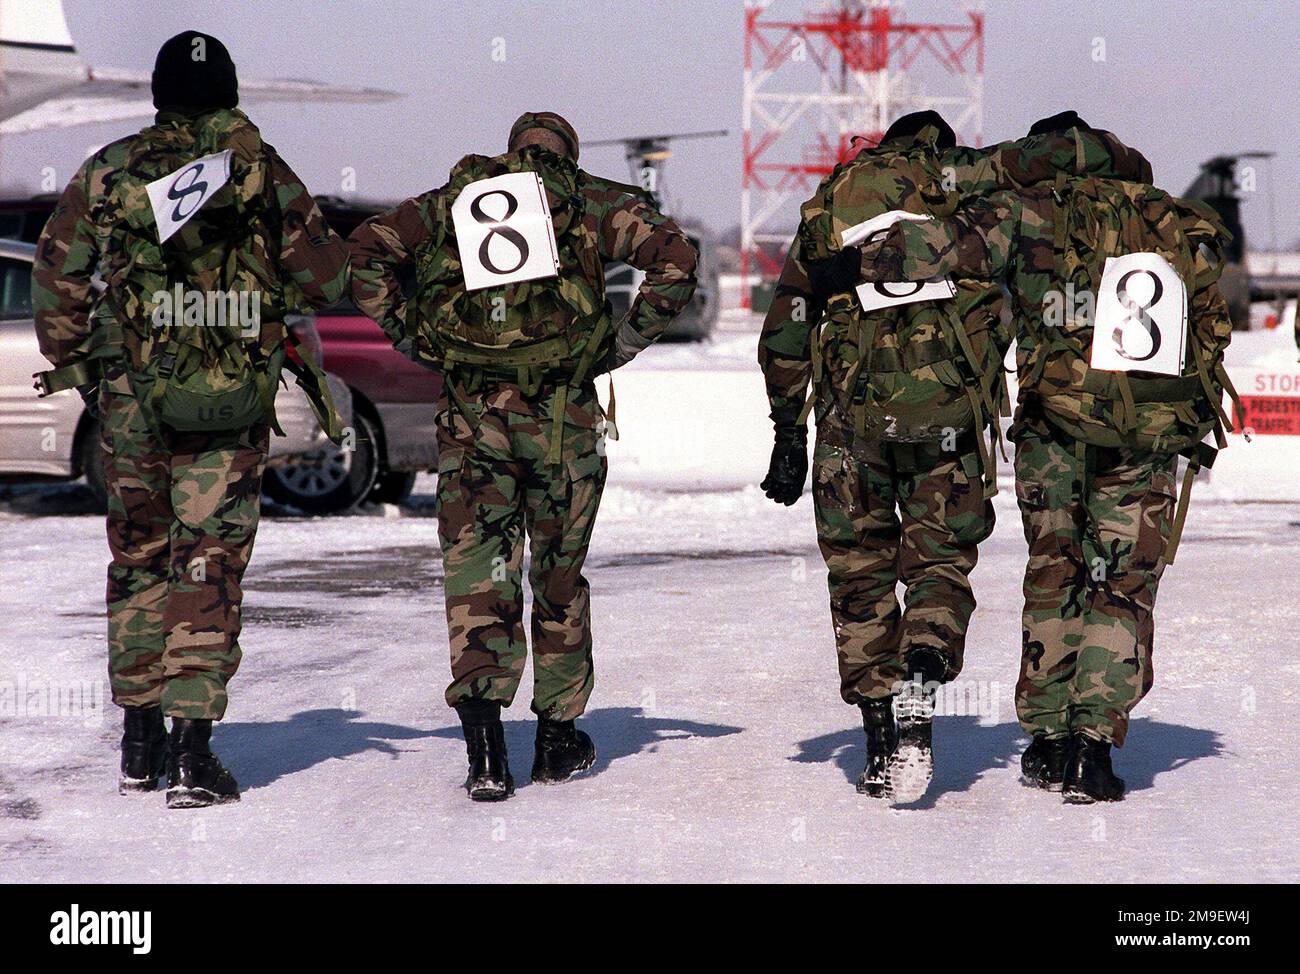 Medium shot. Members of 436th Security Forces Squadron cross the finish line in the Security Forces ruck march honoring Korean War Veterans at Dover AFB, Delaware on January 22, 2000. Medium shot.  Members of 436th Security Forces Squadron cross the finish line in the Security Forces ruck march honoring Korean War Veterans at Dover AFB, Delaware on January 22, 2000. Stock Photo